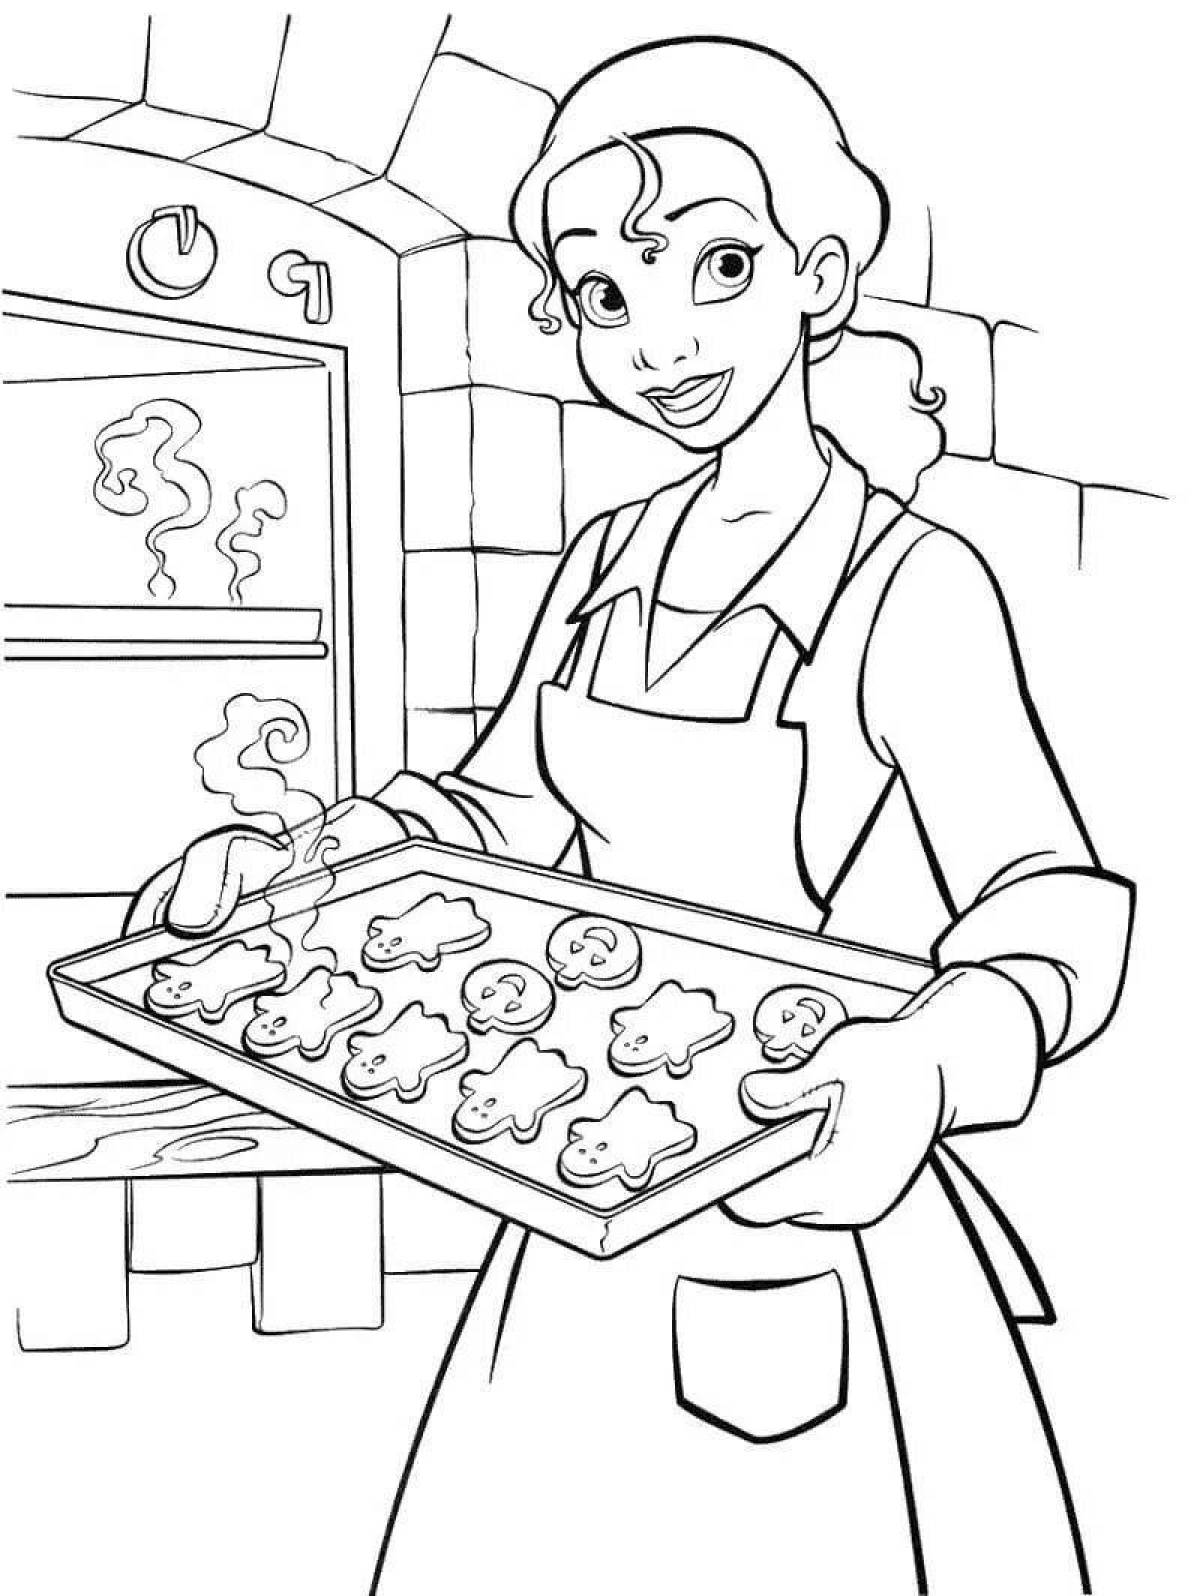 Crazy pastry chef coloring page